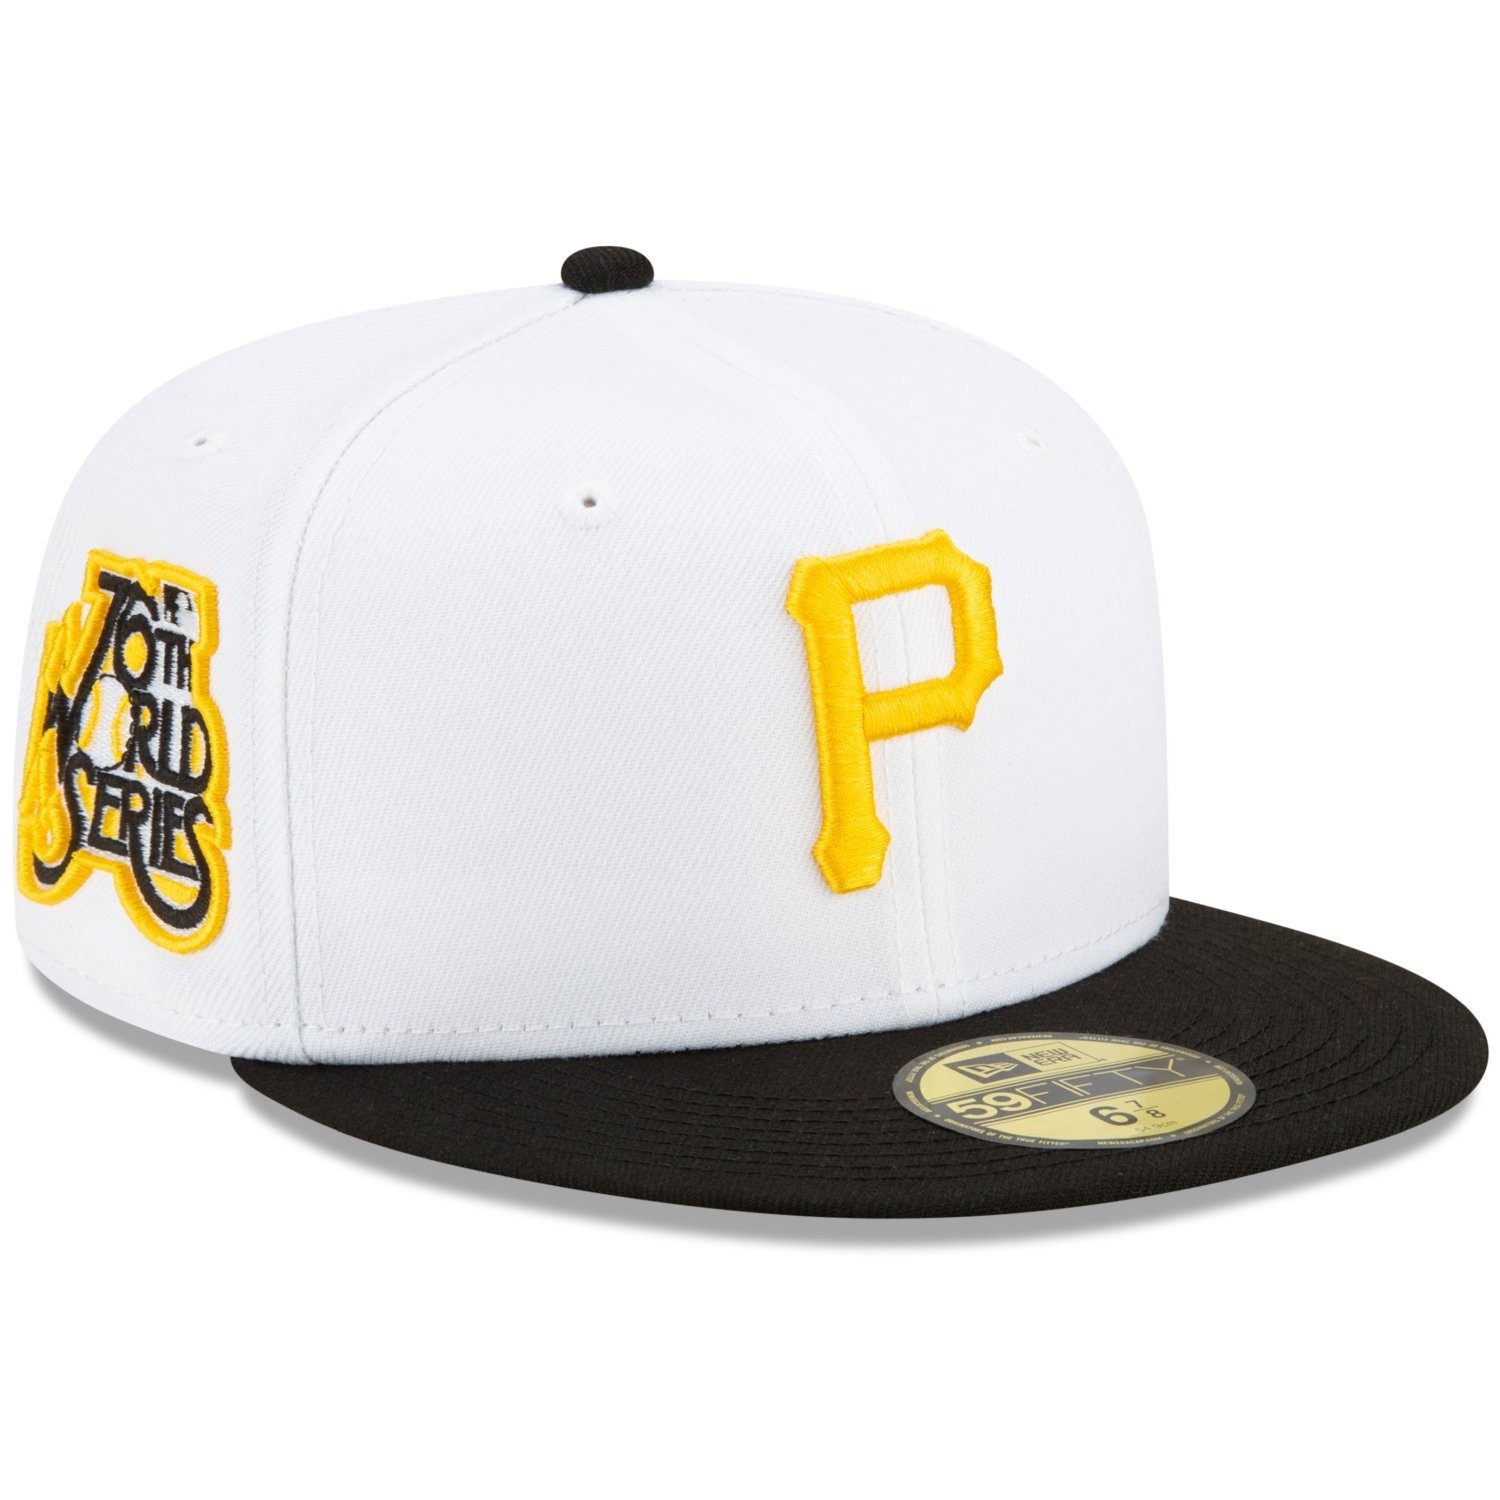 New Era Fitted Cap 59Fifty WORLD SERIES 1979 Pittsburgh Pirates | Fitted Caps